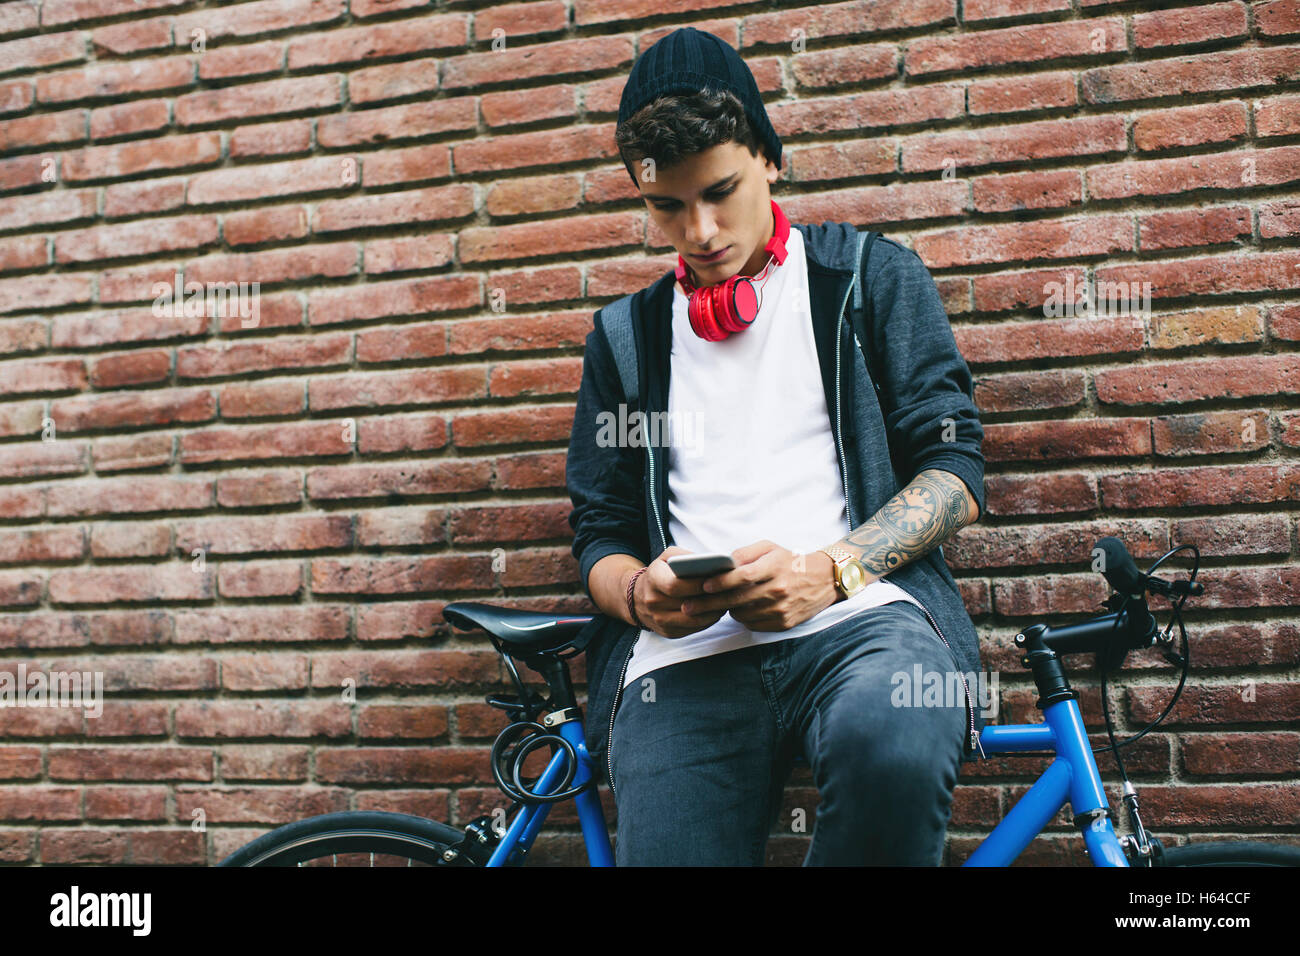 Teenager with a fixie bike, using smartphone Stock Photo